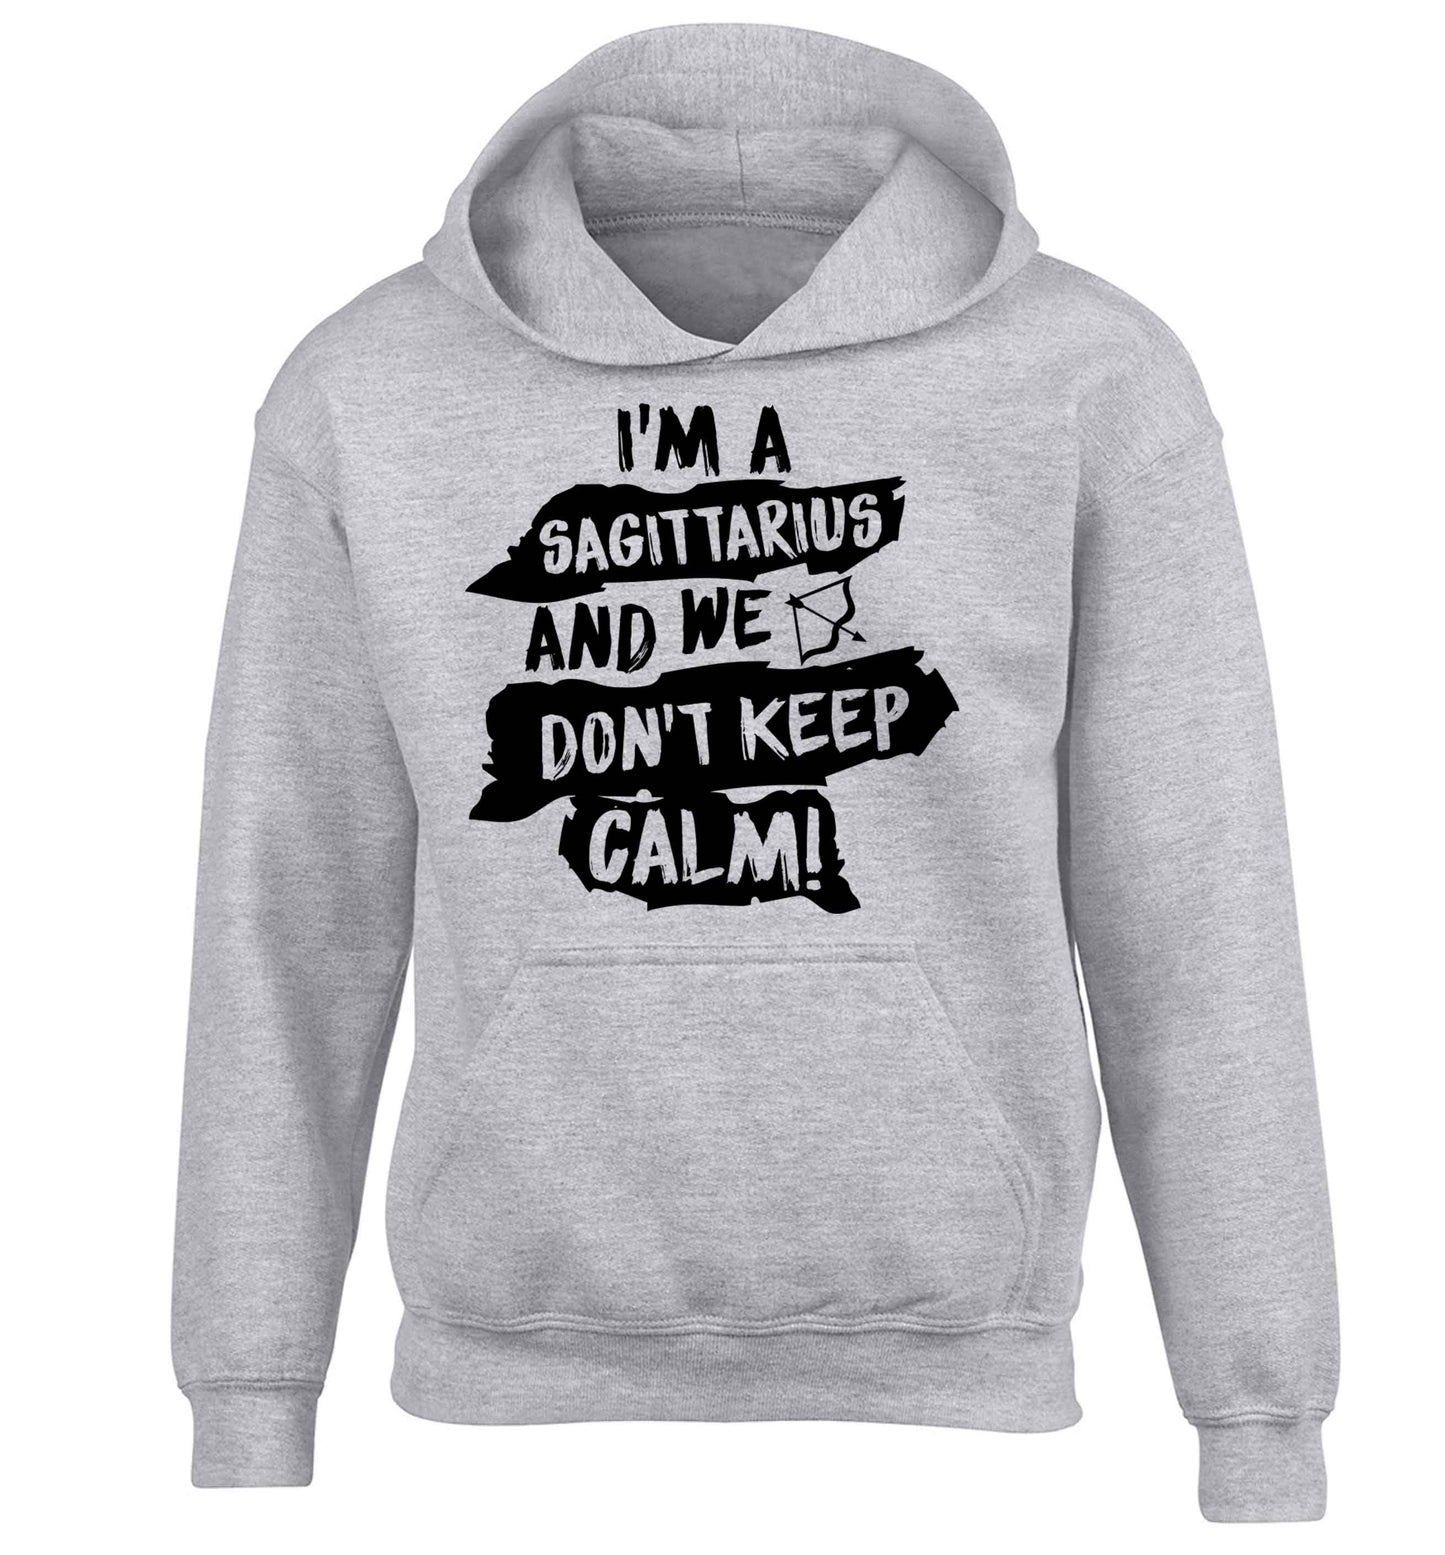 I'm a sagittarius and we don't keep calm children's grey hoodie 12-13 Years